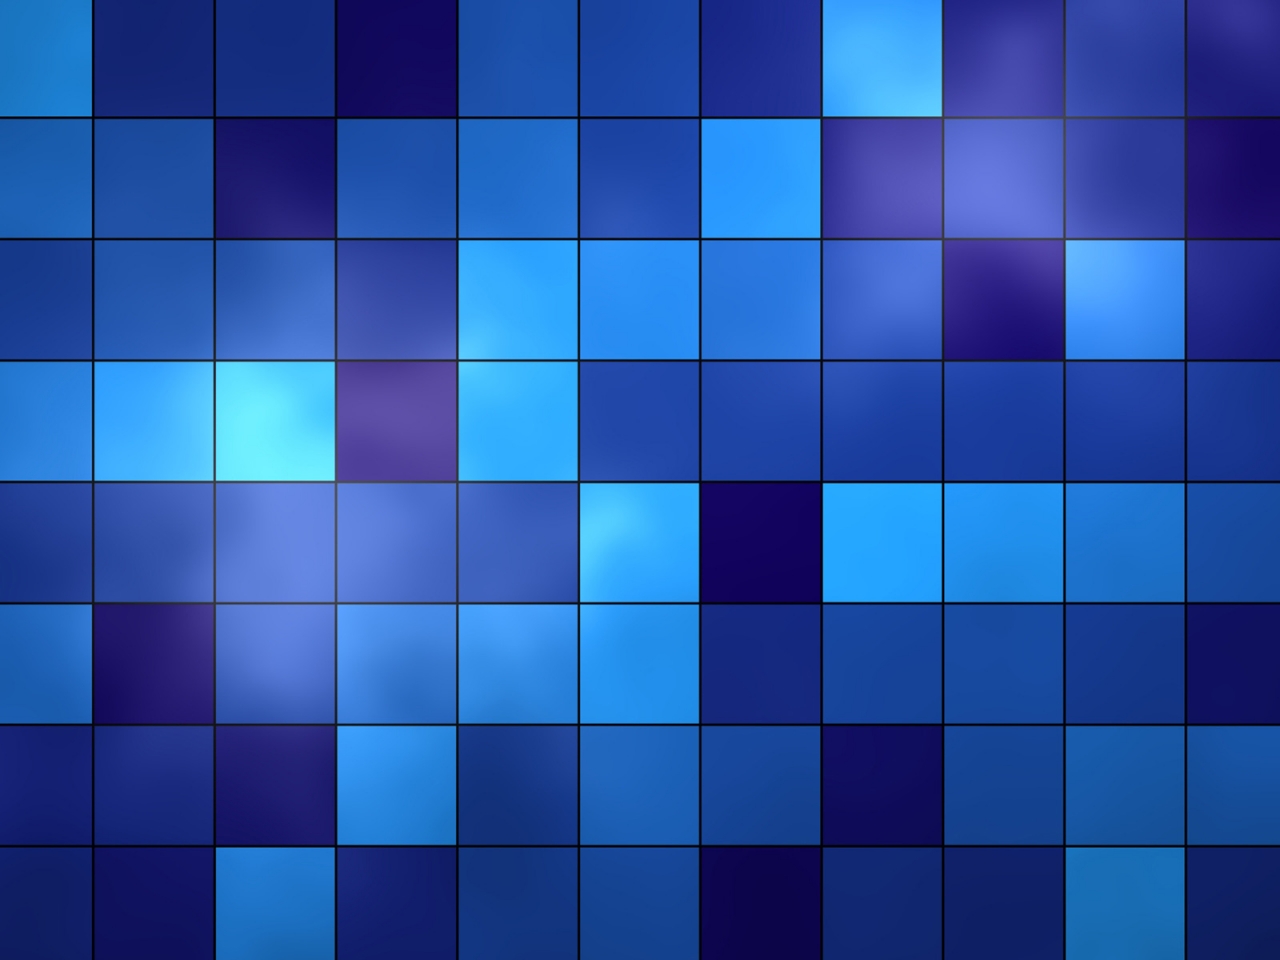 Blue Tiles for 1280 x 960 resolution